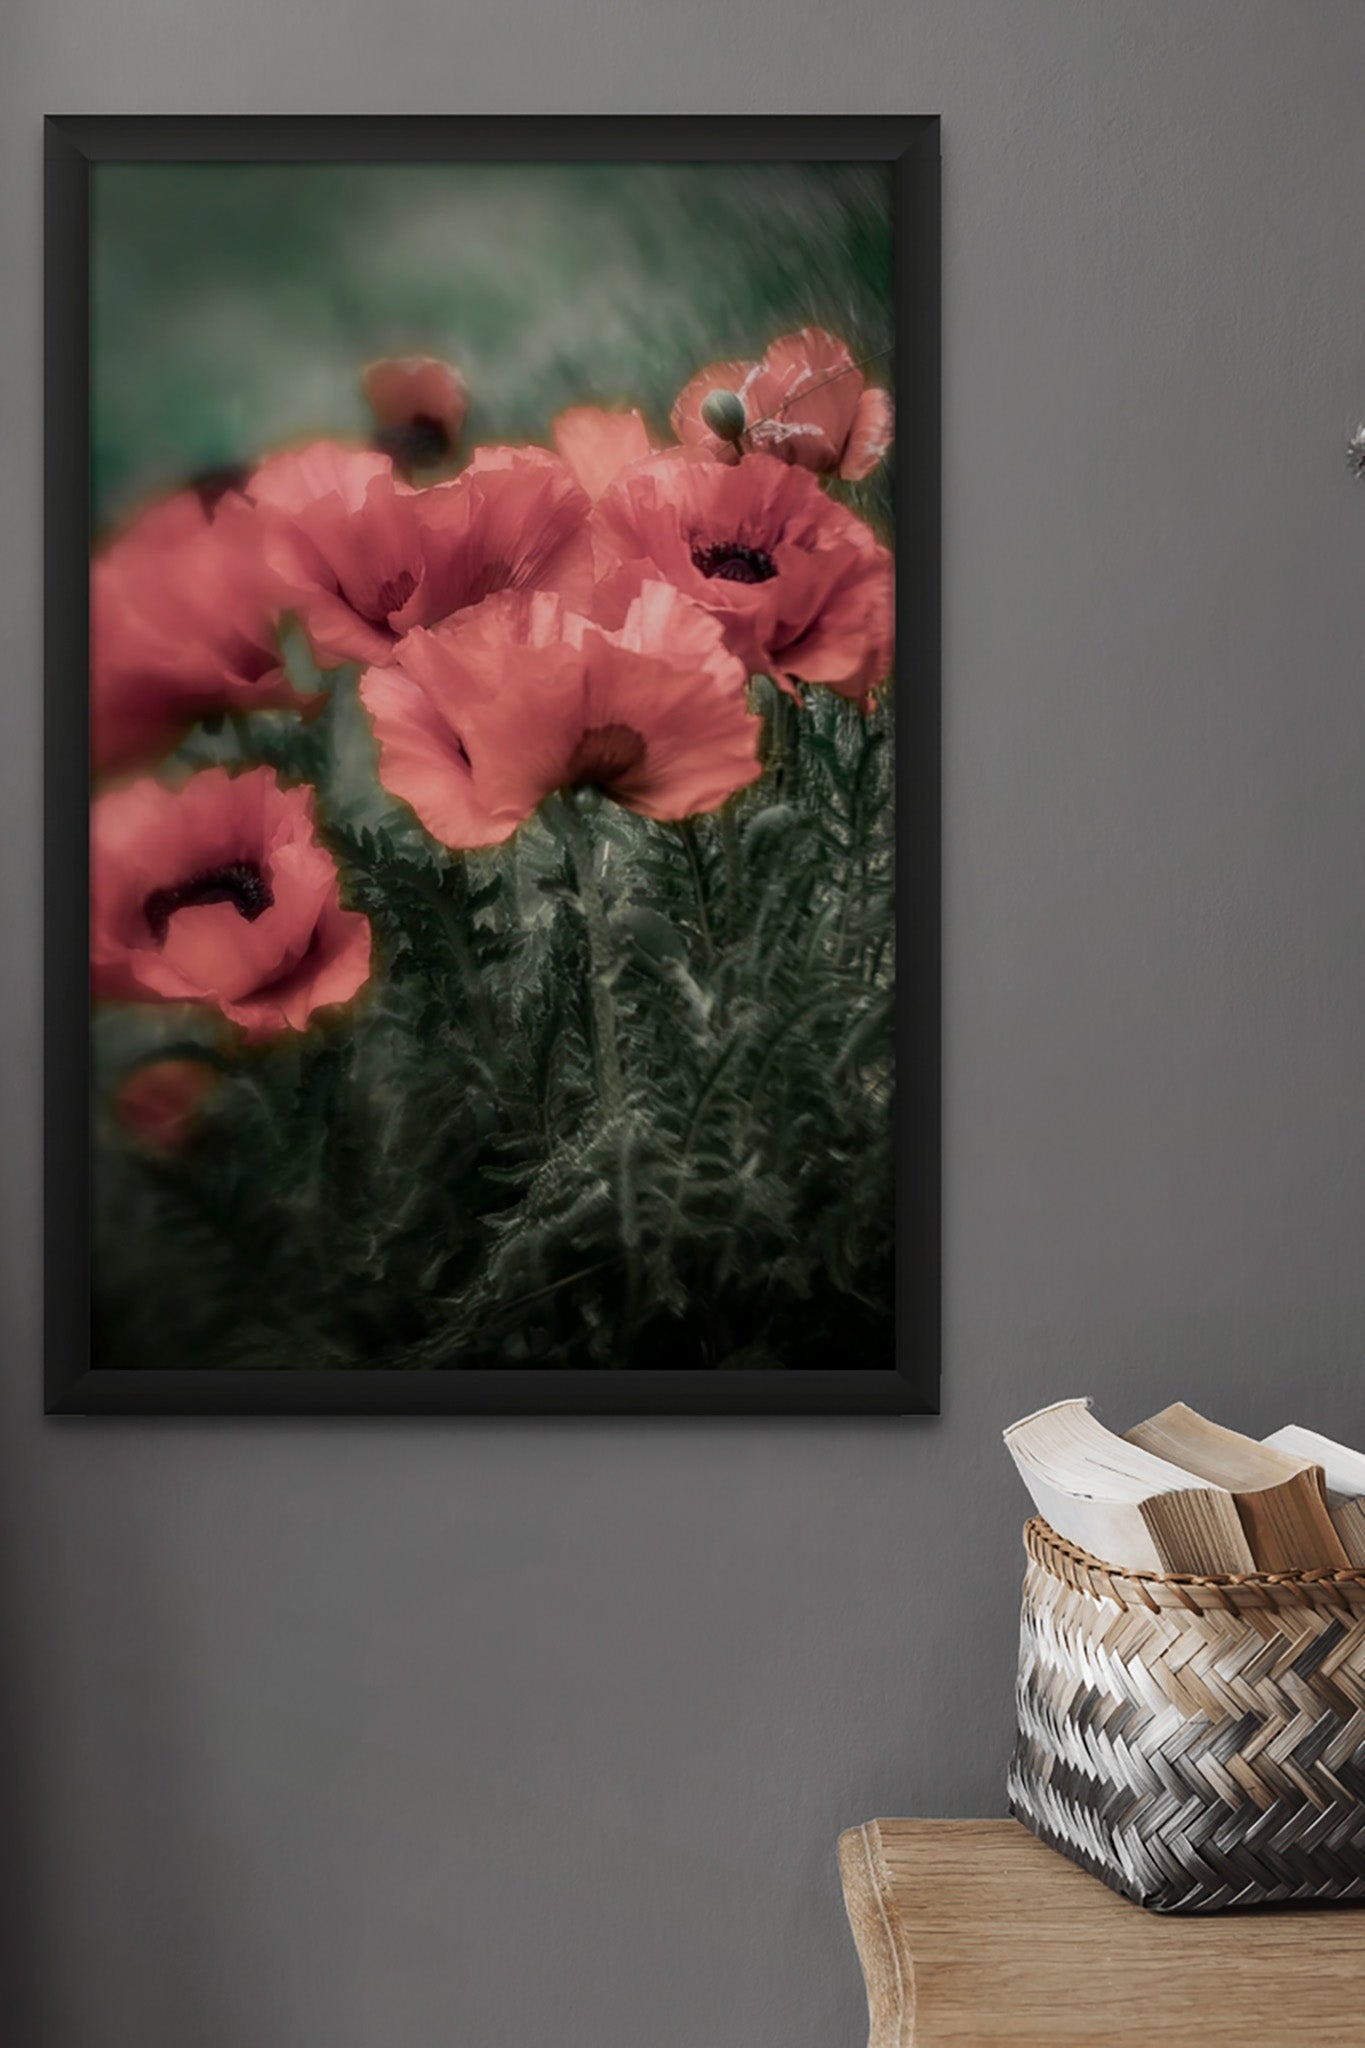 Picture in a floating frame hanging on the wall of room. There is a table in the rooms and books on the table. The picture is a fine art photograph of red poppies on dark green stormy background by Cameron Dreaux. 